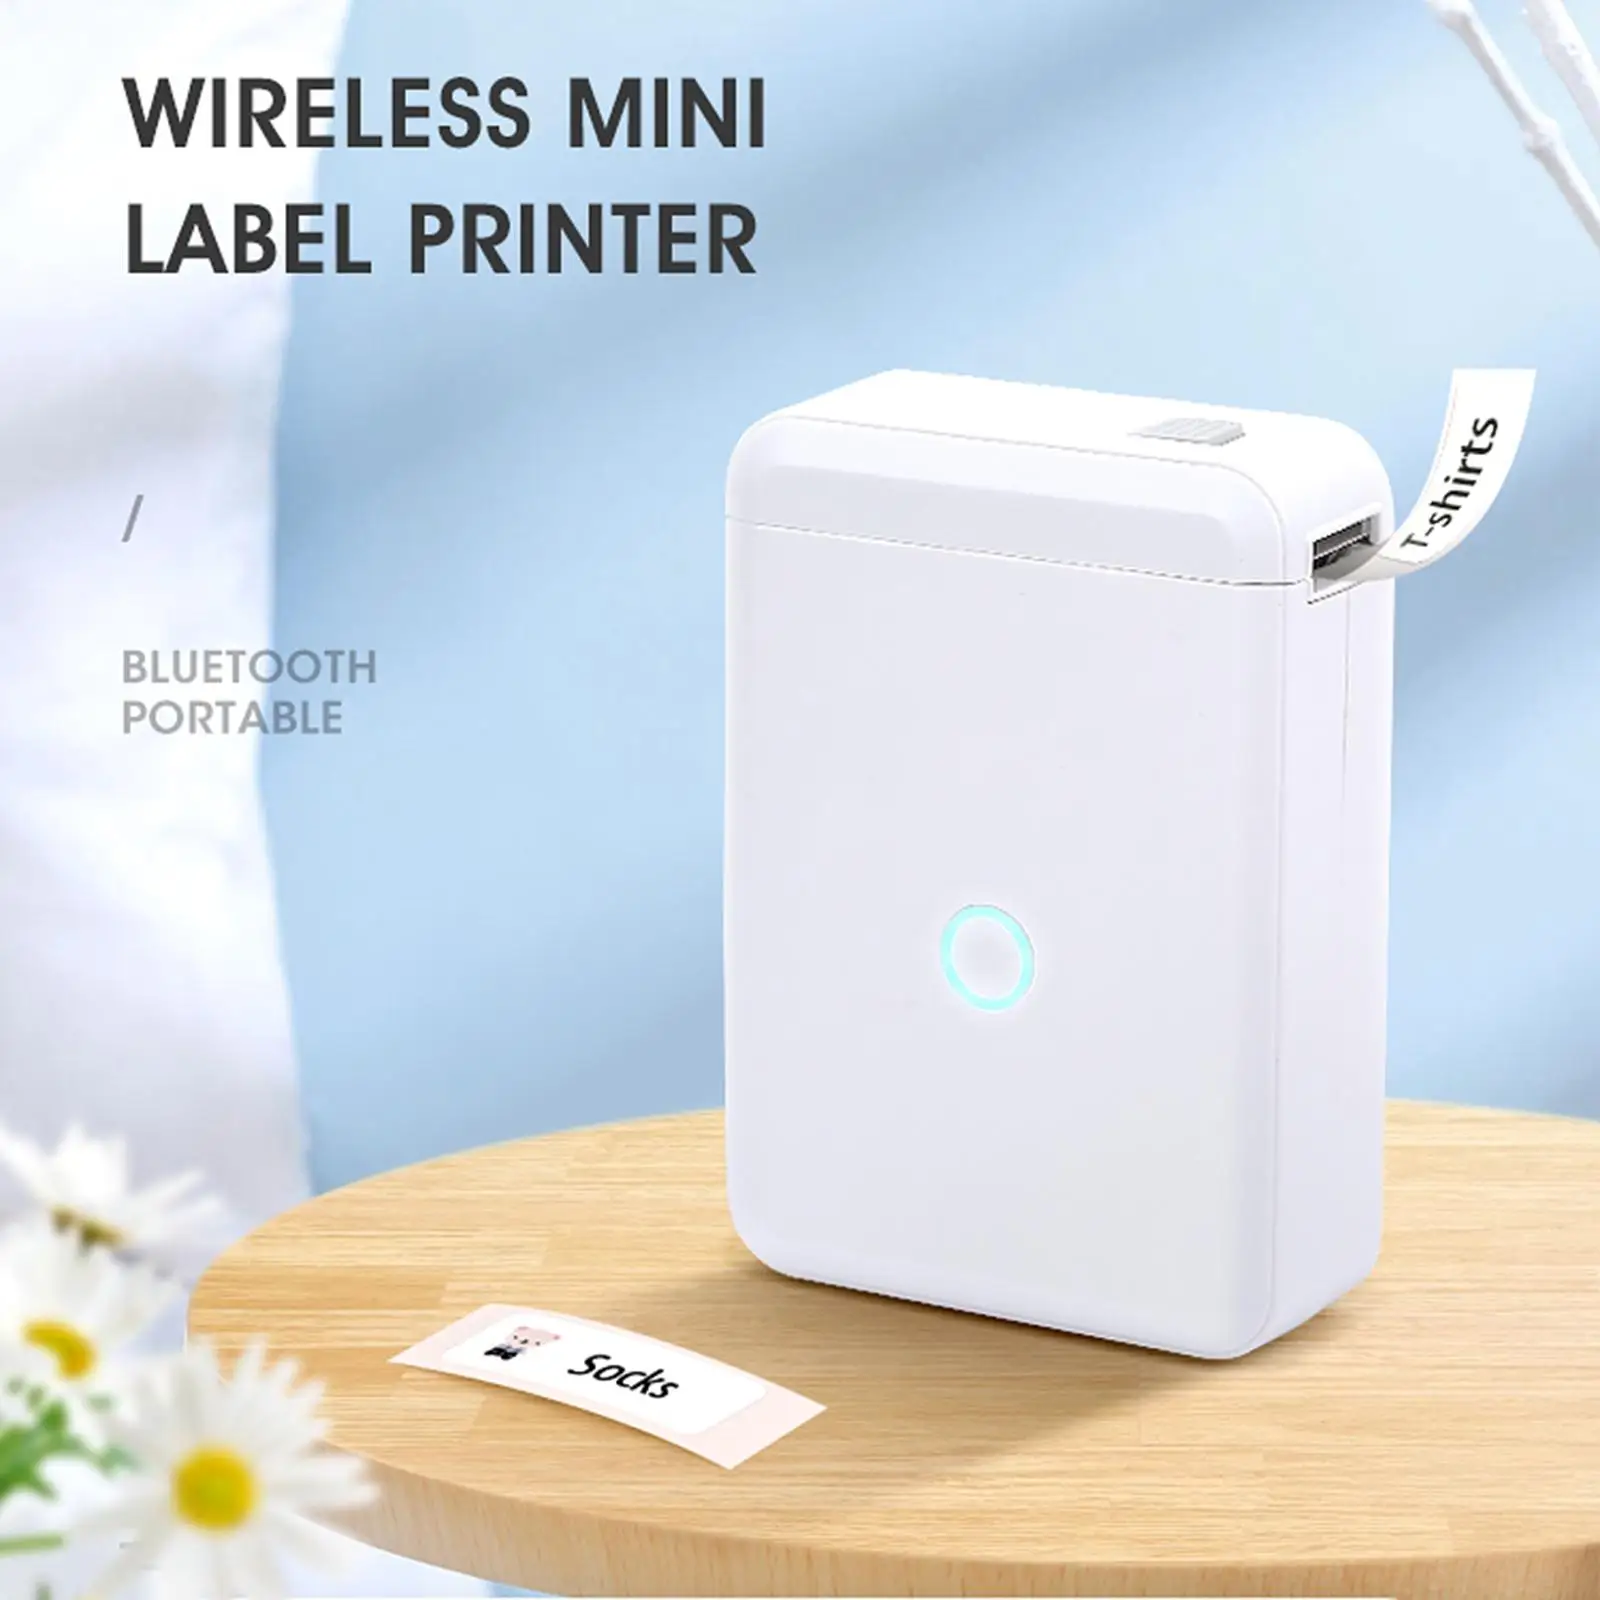 D110 Label Maker Machine with 1 Roll Label Paper Wireless Label Sticker Printer for iOS and Android for Home Office Organization